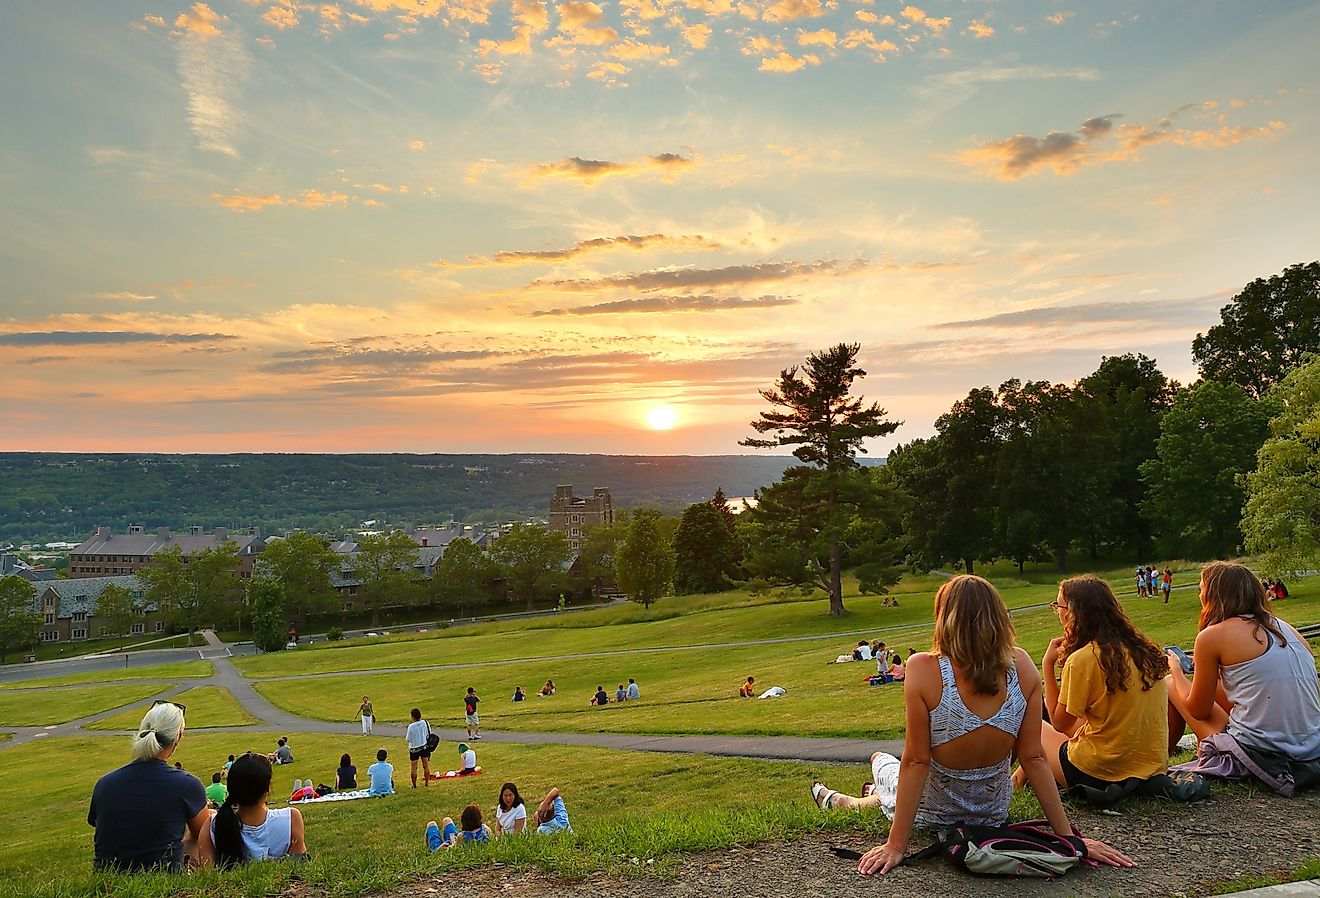 Students at Libe Slope watching sunset on campus of Cornell University in Ithaca. Image credit Jay Yuan via Shutterstock.